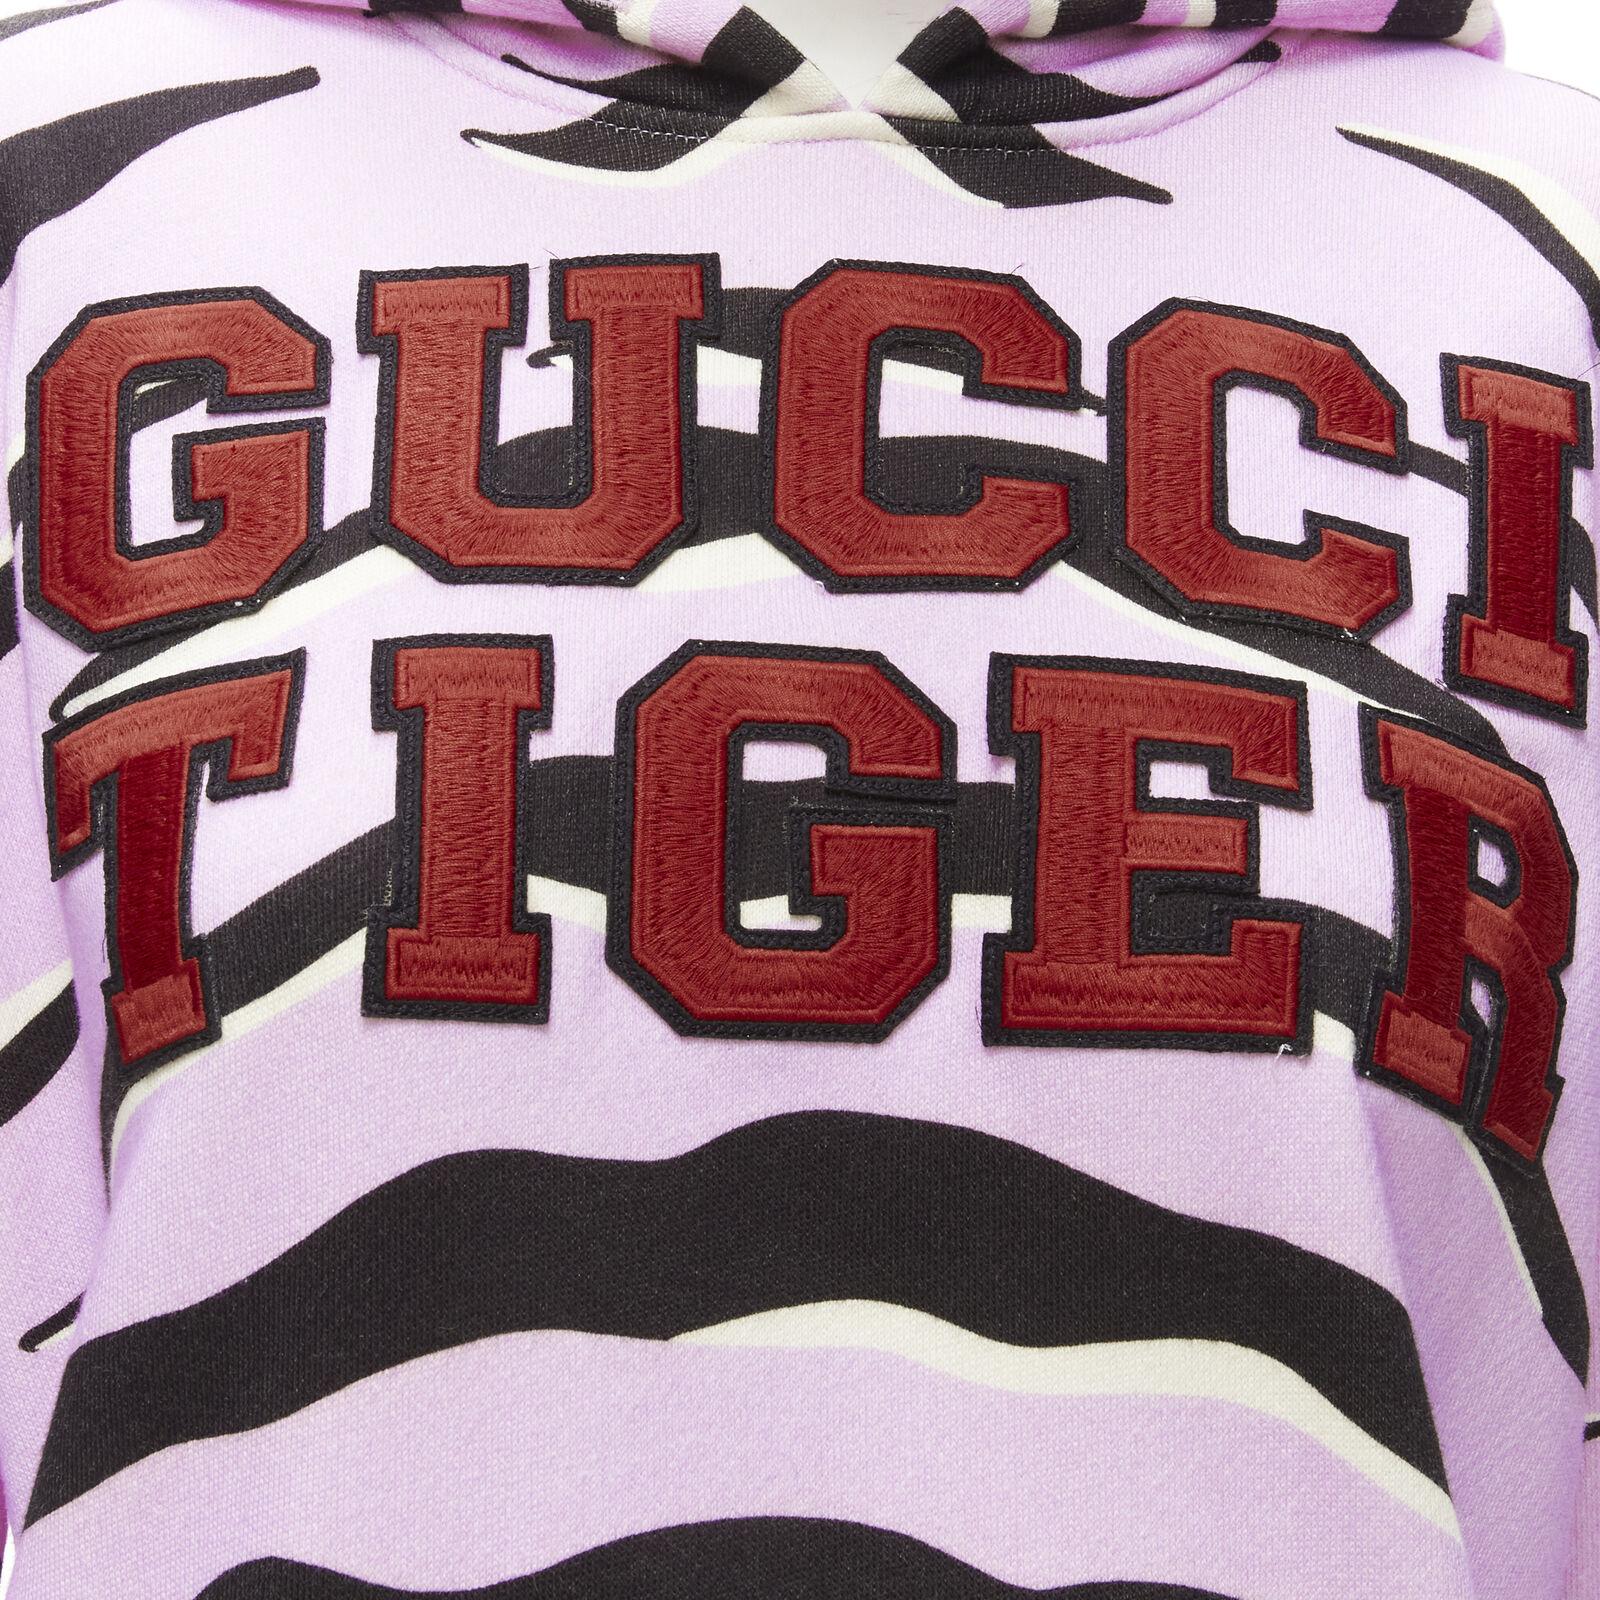 GUCCI TIGER 2022 purple cotton embroidery patch logo striped hoodie XXS
Reference: AAWC/A00260
Brand: Gucci
Designer: Alessandro Michele
Collection: 2022 Gucci Tiger
Material: Cotton
Color: Purple
Pattern: Animal Print
Closure: Drawstring
Made in: